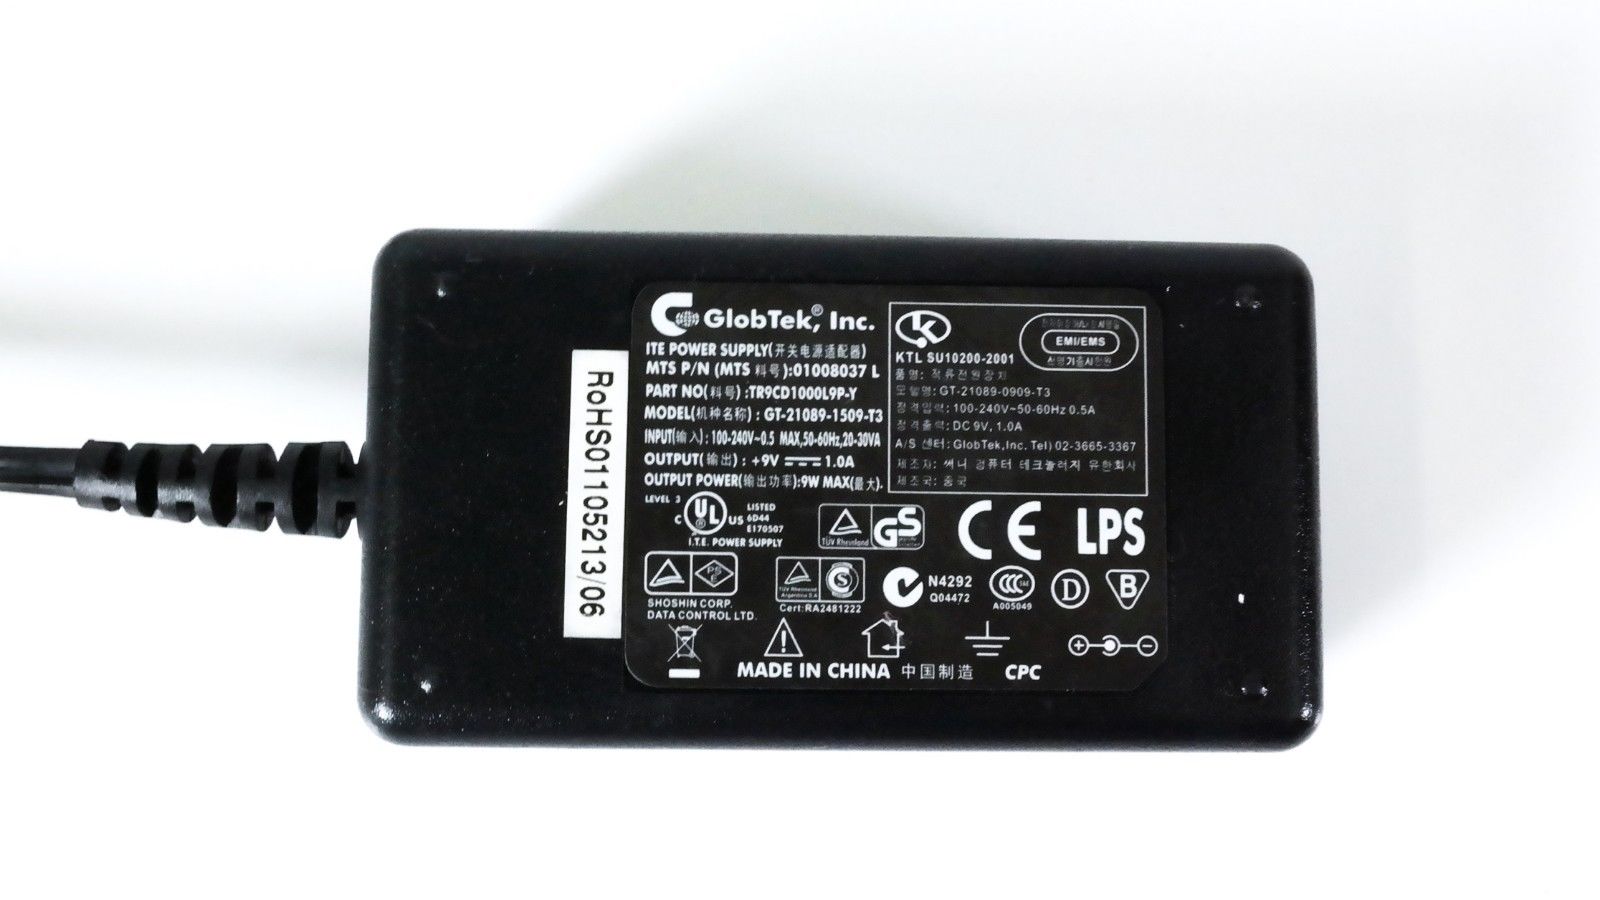 Genuine 9V 1.0A GlobTek Inc TR9CD1000L9P-Y GT-21089-1509-T3 9W Max AC Power Adapte - Click Image to Close